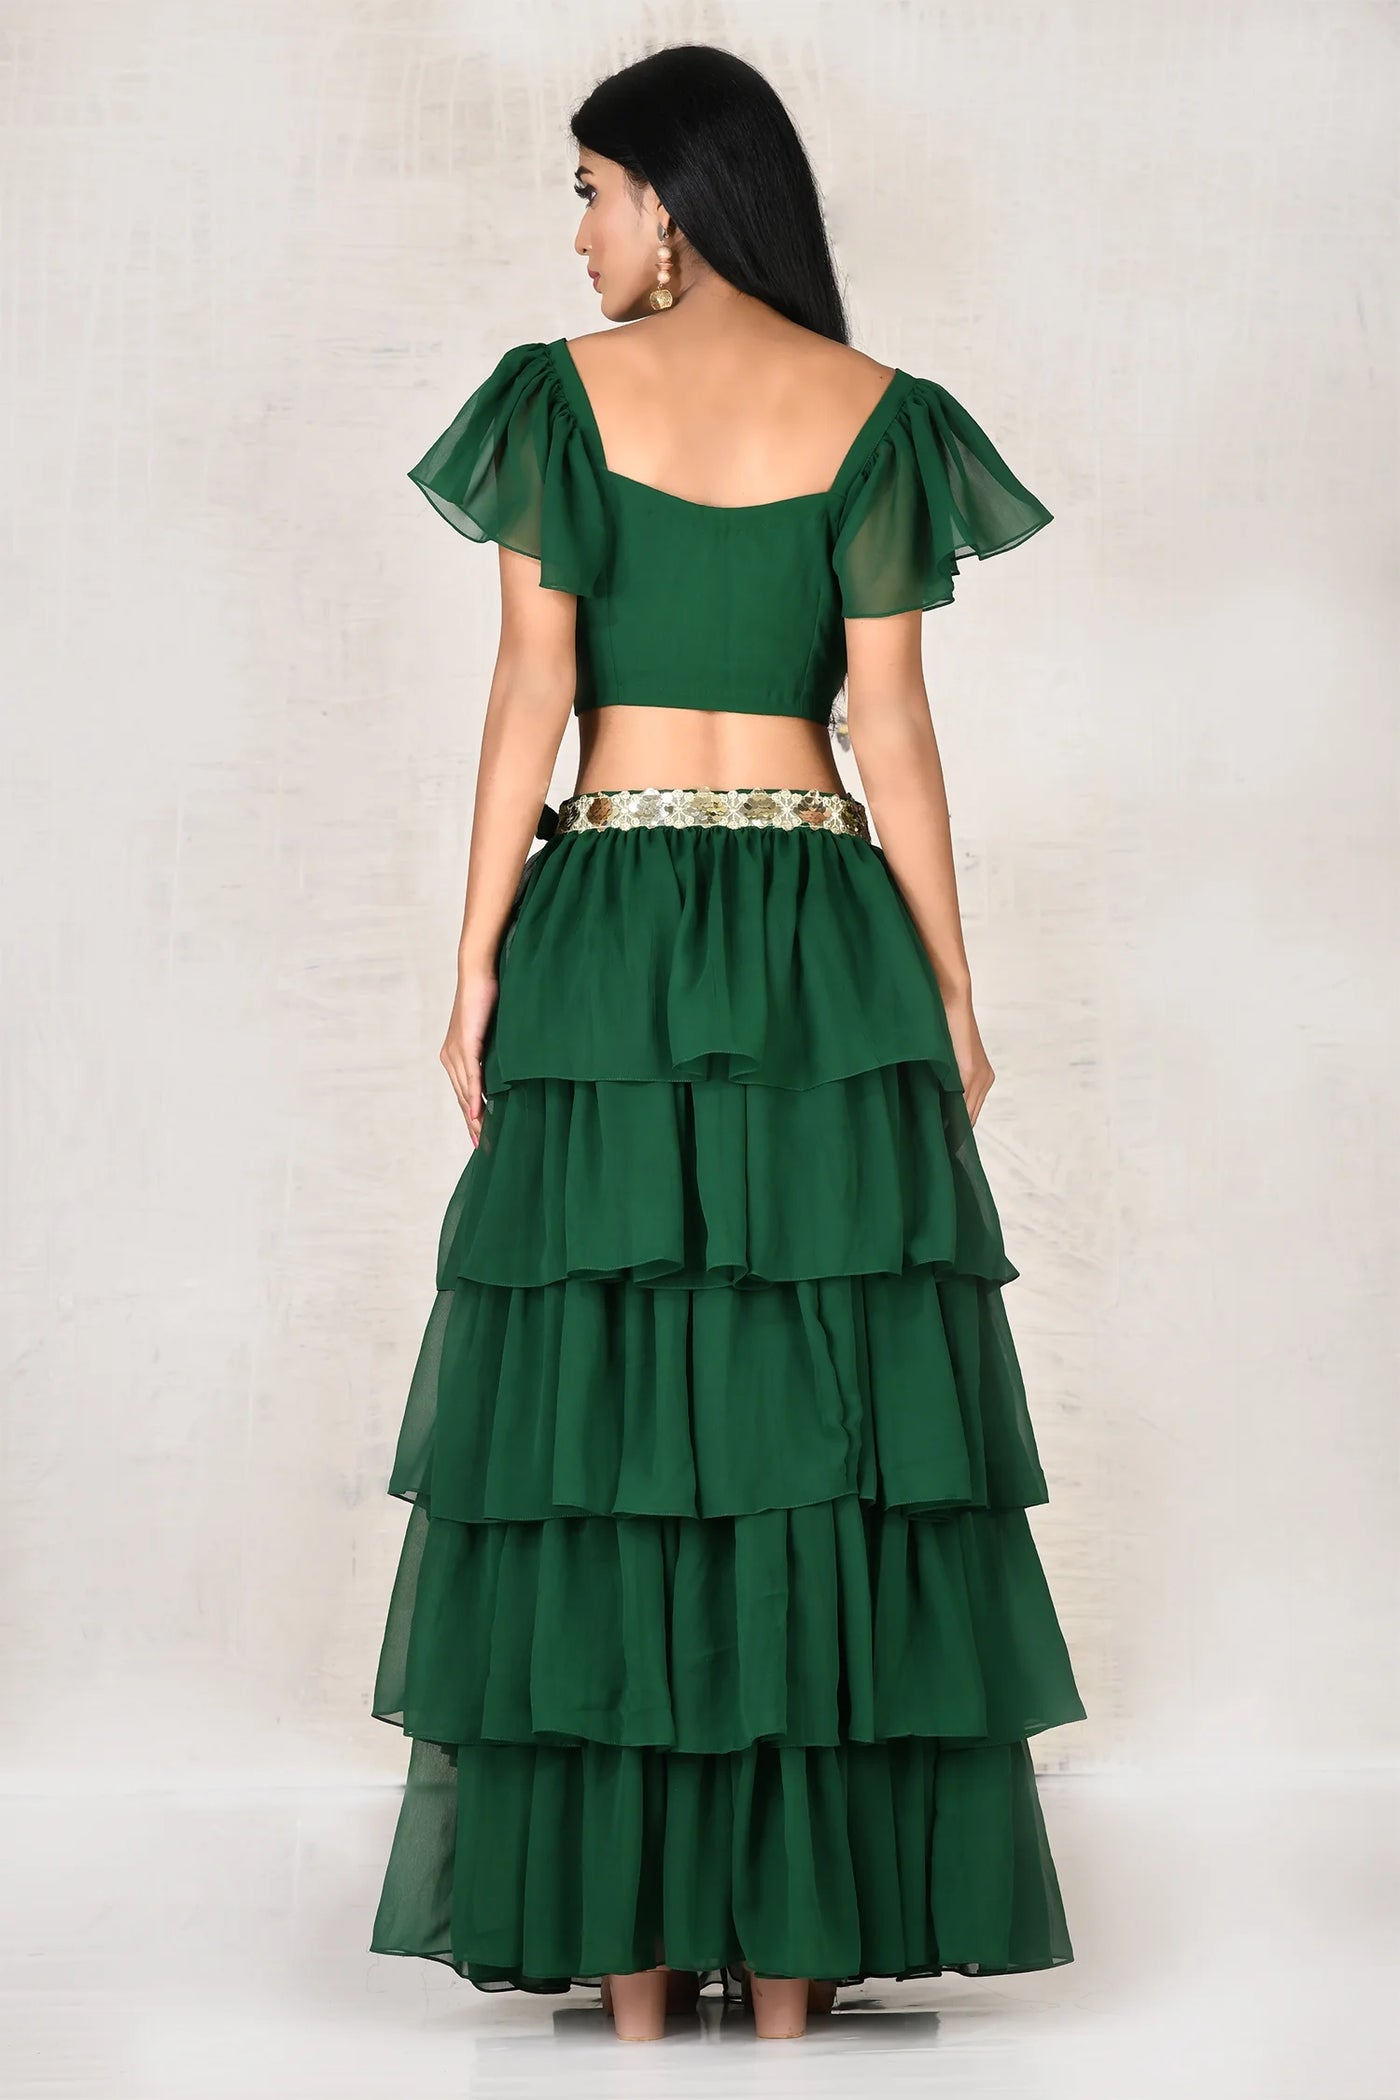 Green Crop Top Skirt Set Indian Clothing in Denver, CO, Aurora, CO, Boulder, CO, Fort Collins, CO, Colorado Springs, CO, Parker, CO, Highlands Ranch, CO, Cherry Creek, CO, Centennial, CO, and Longmont, CO. NATIONWIDE SHIPPING USA- India Fashion X